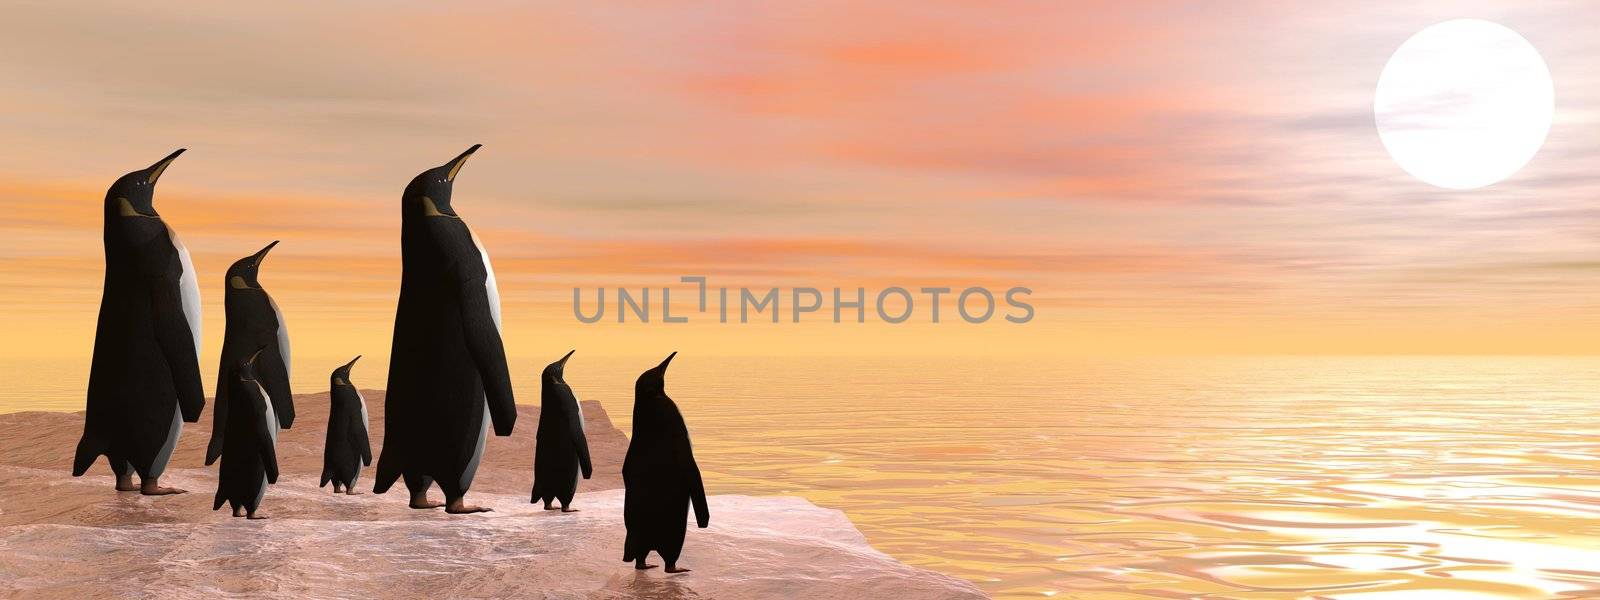 Penguin family sharing the beauty of sunset upon the ocean